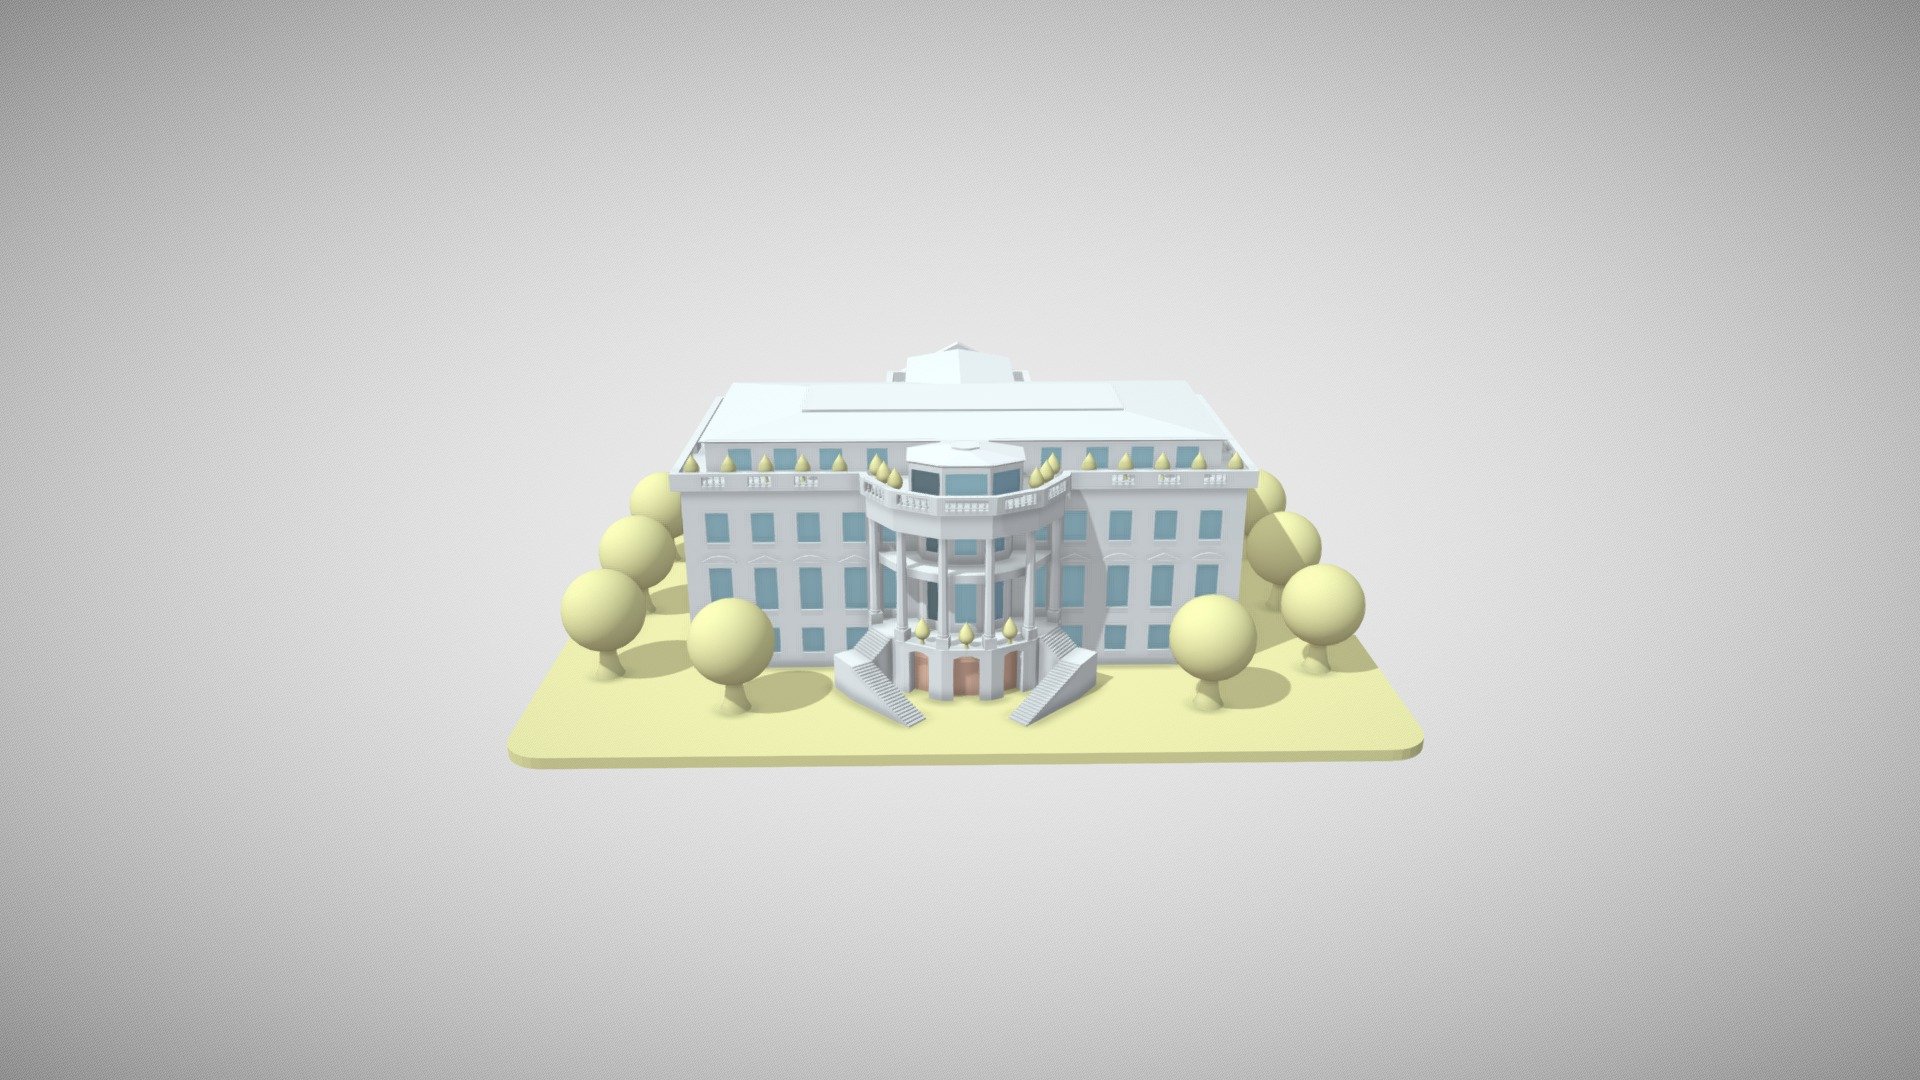 This is a simplified low poly model of the White House. This was done with Blender. The zip file includes same models in fbx, dae, blend, obj formats 3d model